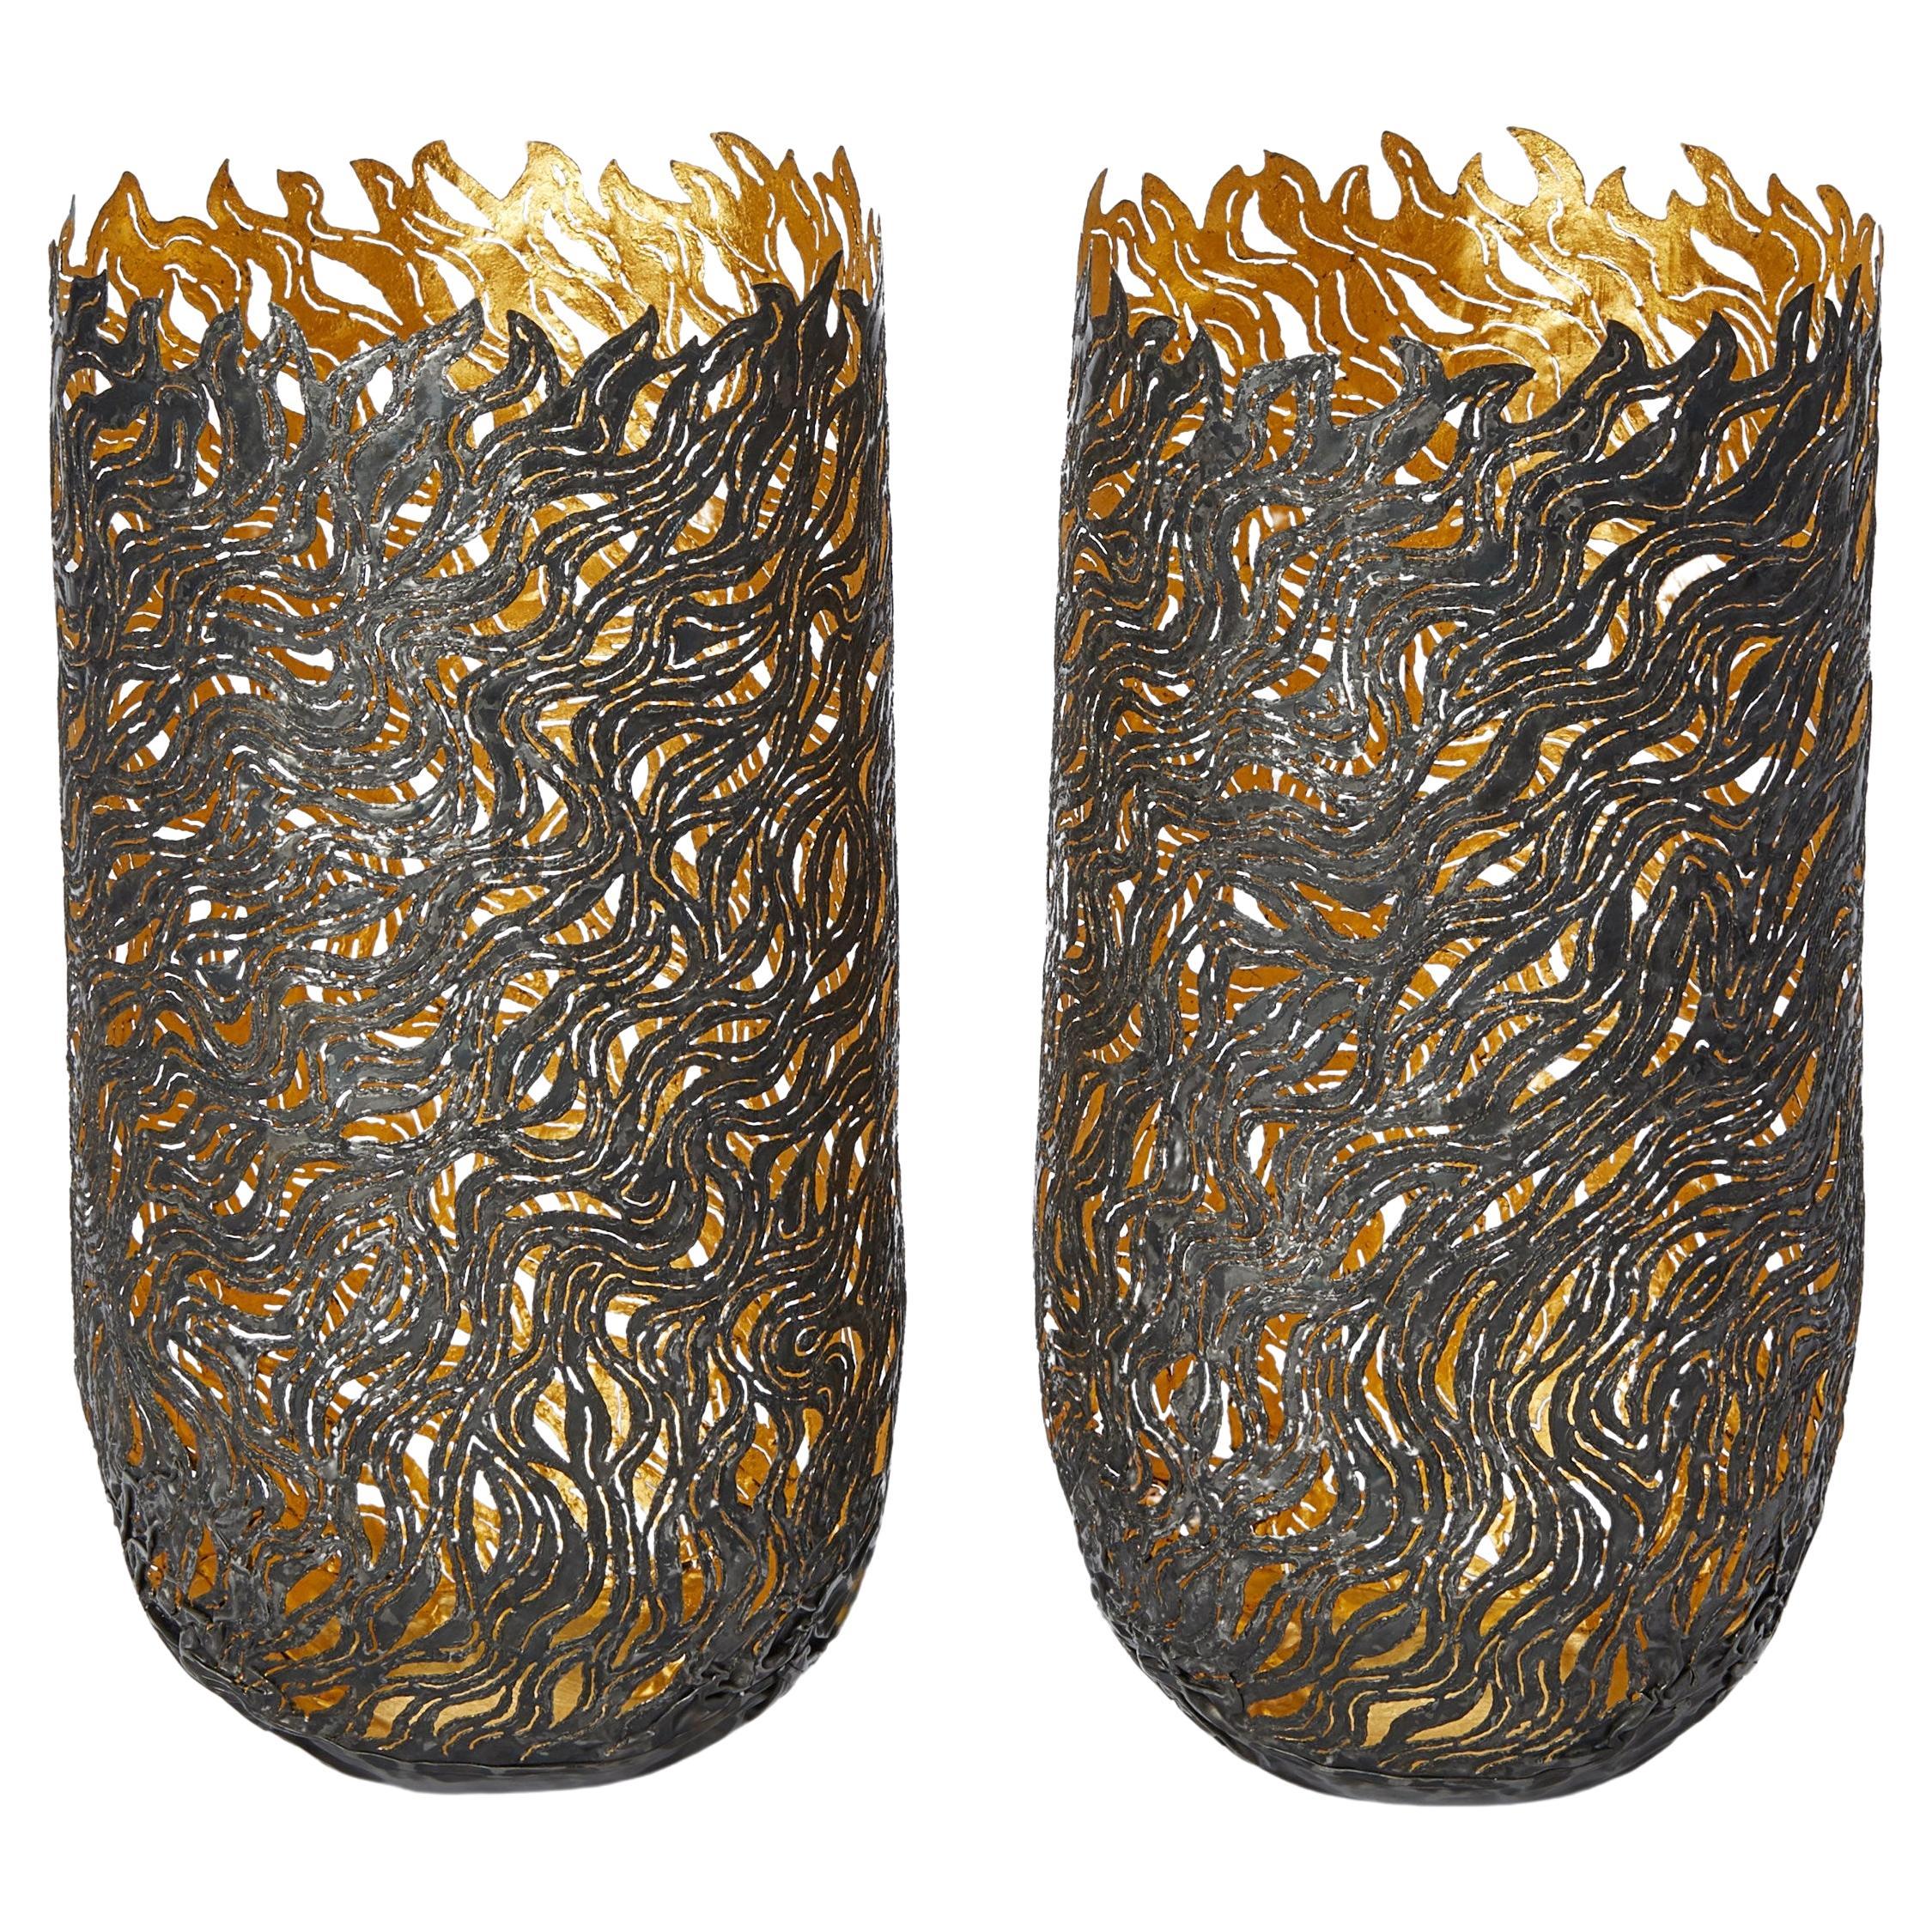  Autumn Dance Vessels, organic textured steel & gold vessels by Claire Malet